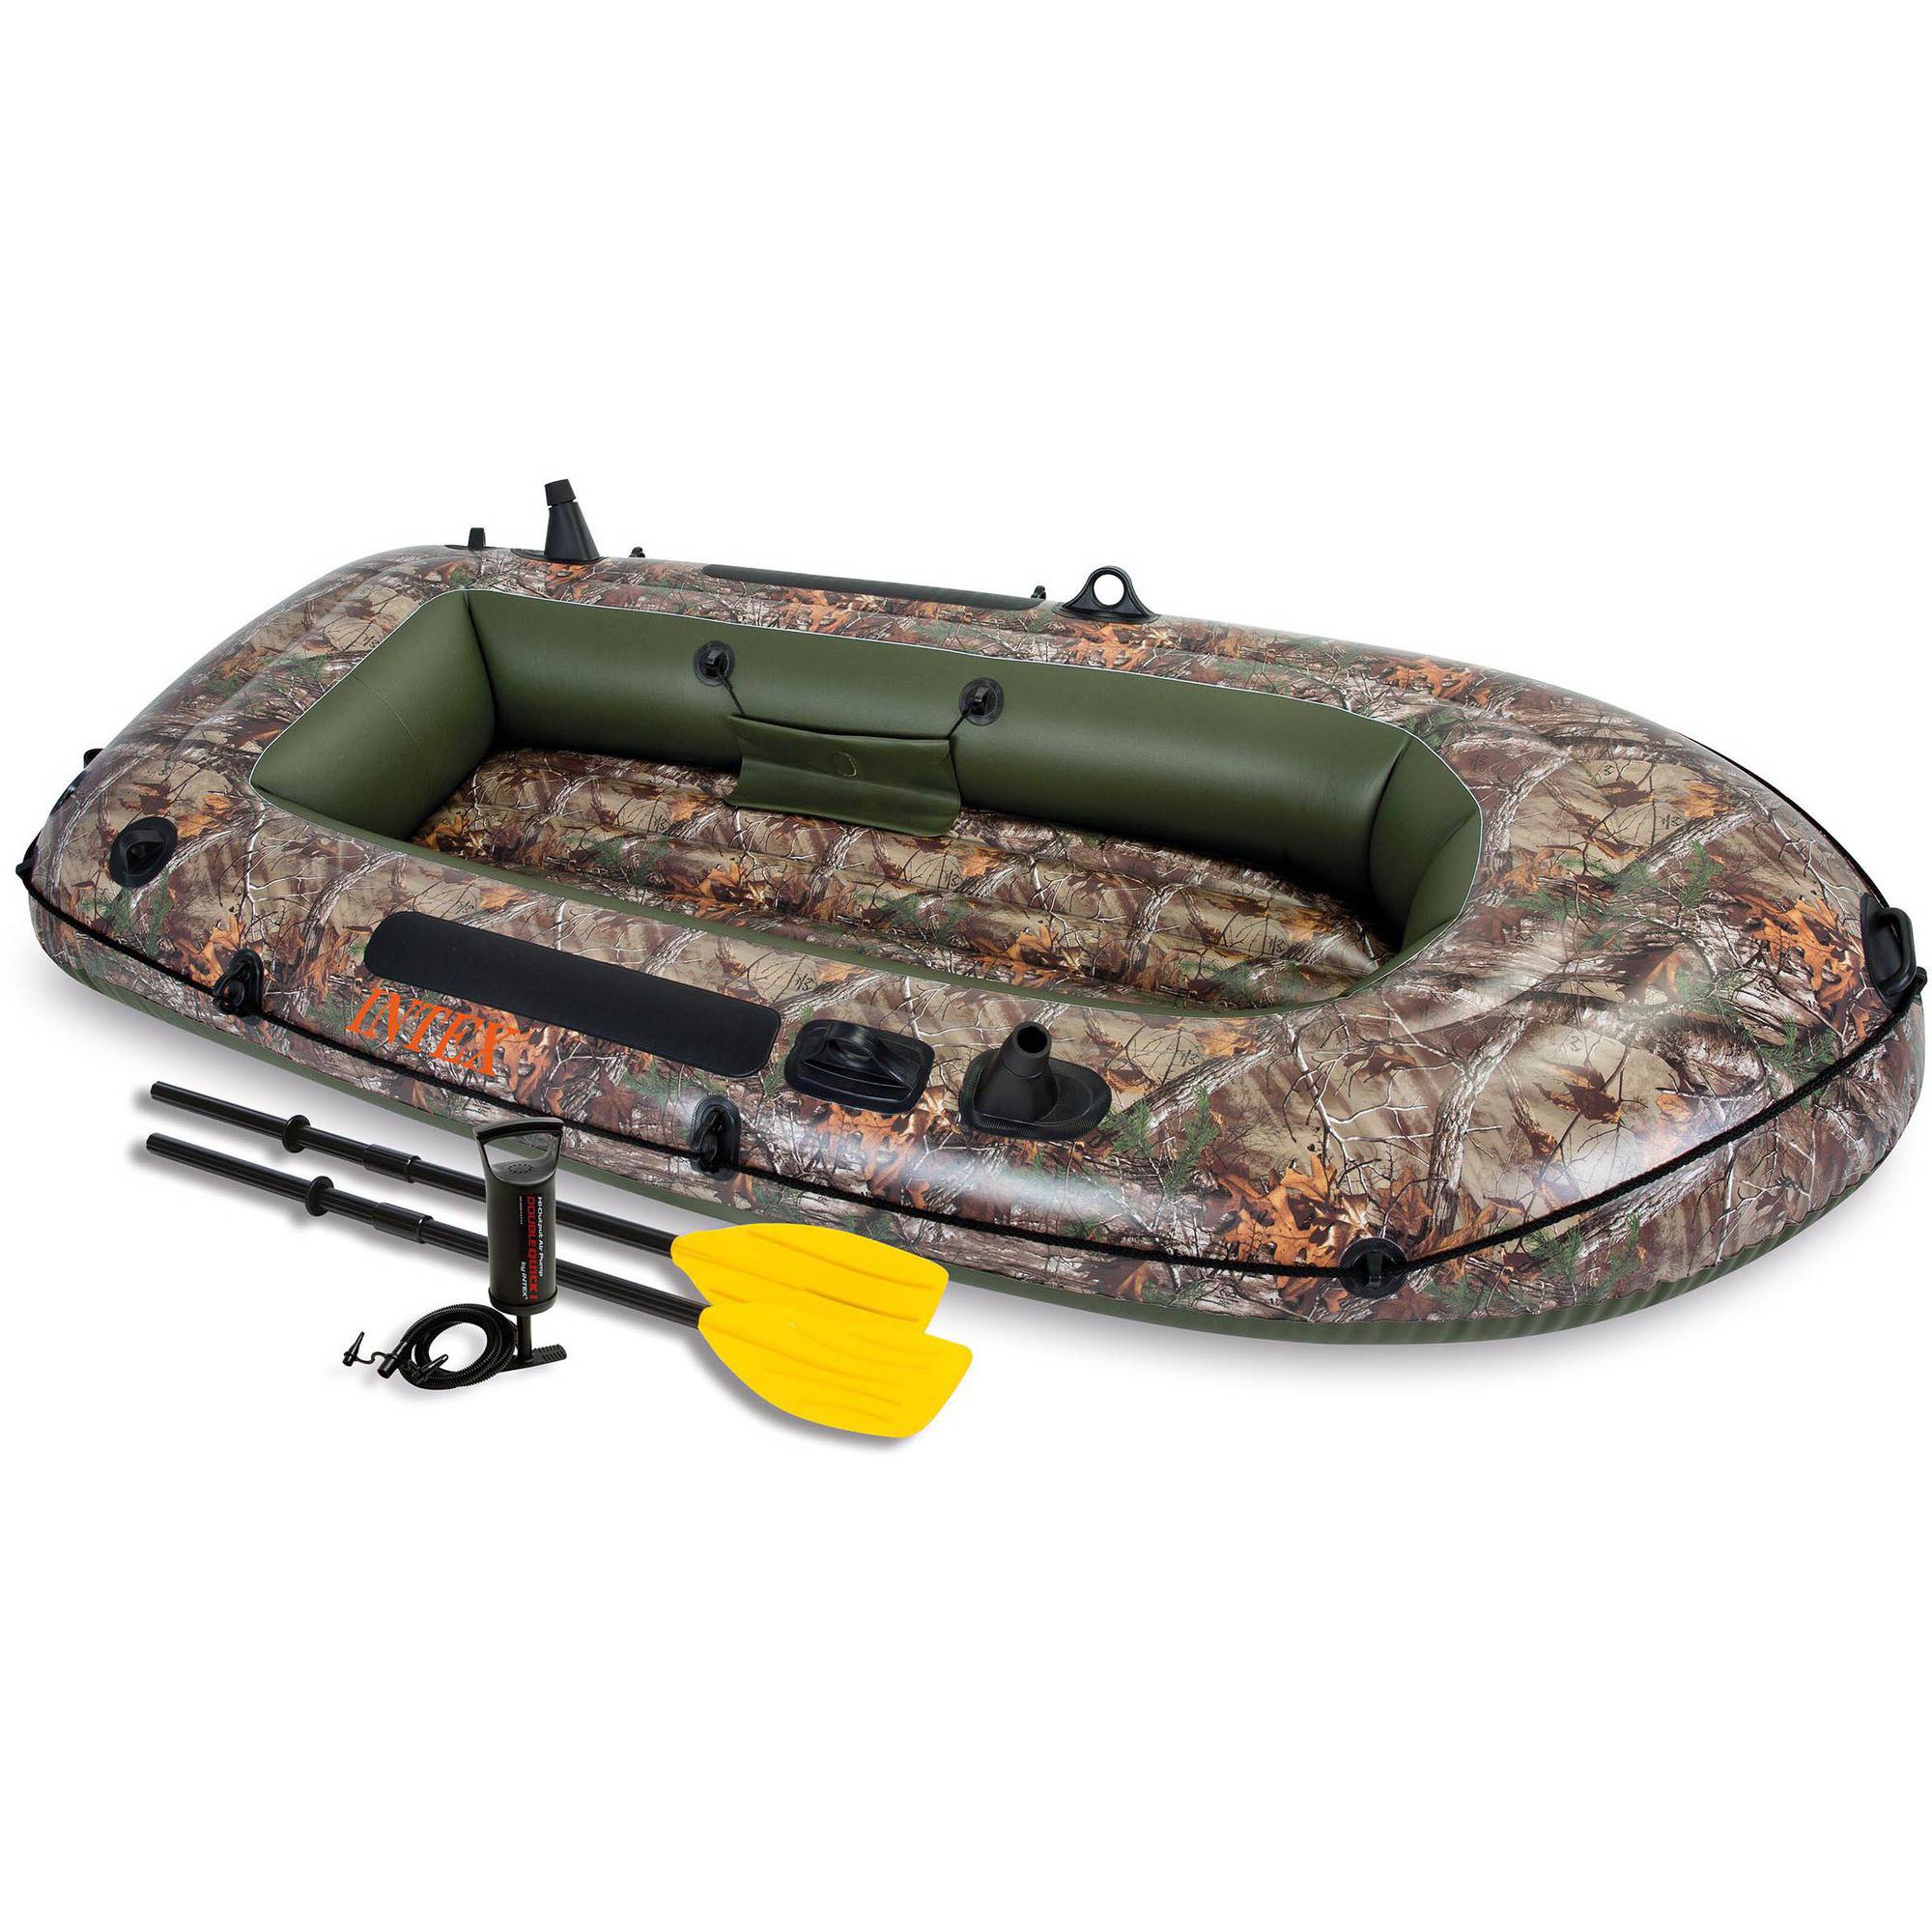 Intex Inflatable Realtree Seahawk 2 Two-Person Boat with Oars and Pump - image 1 of 2